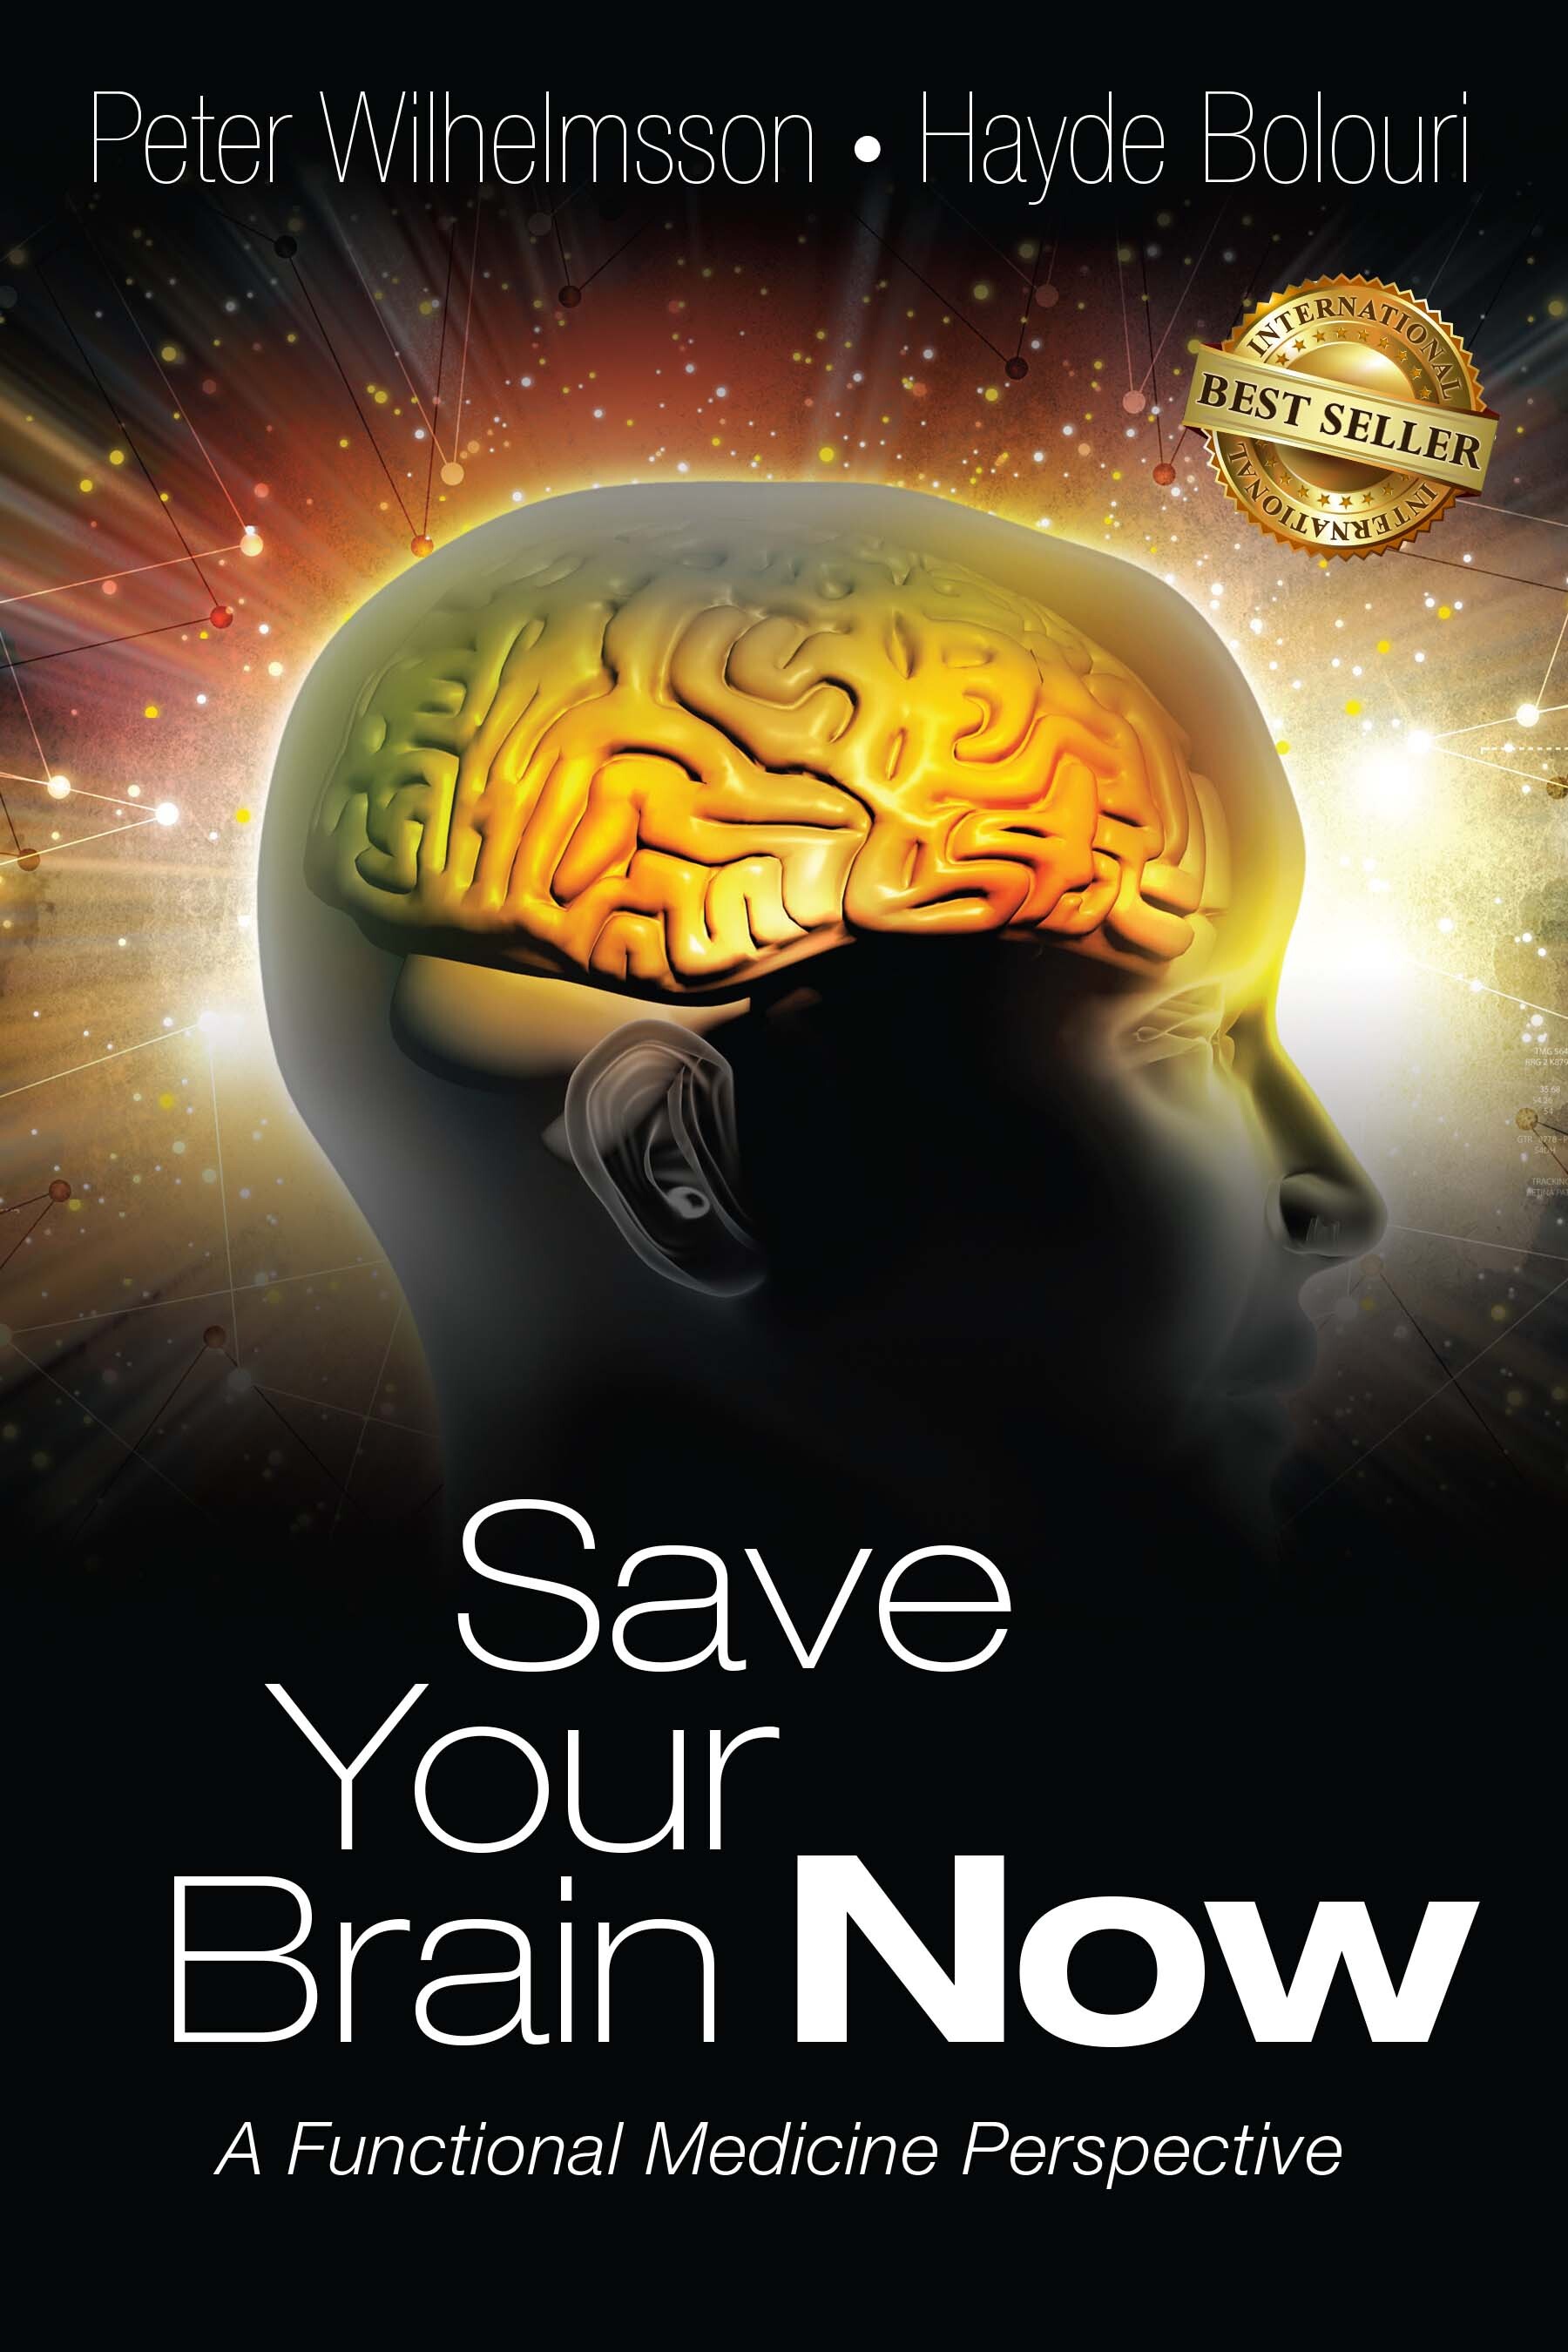 Save_Your_Brain_Now_-_Book_Cover9kns0.jpg